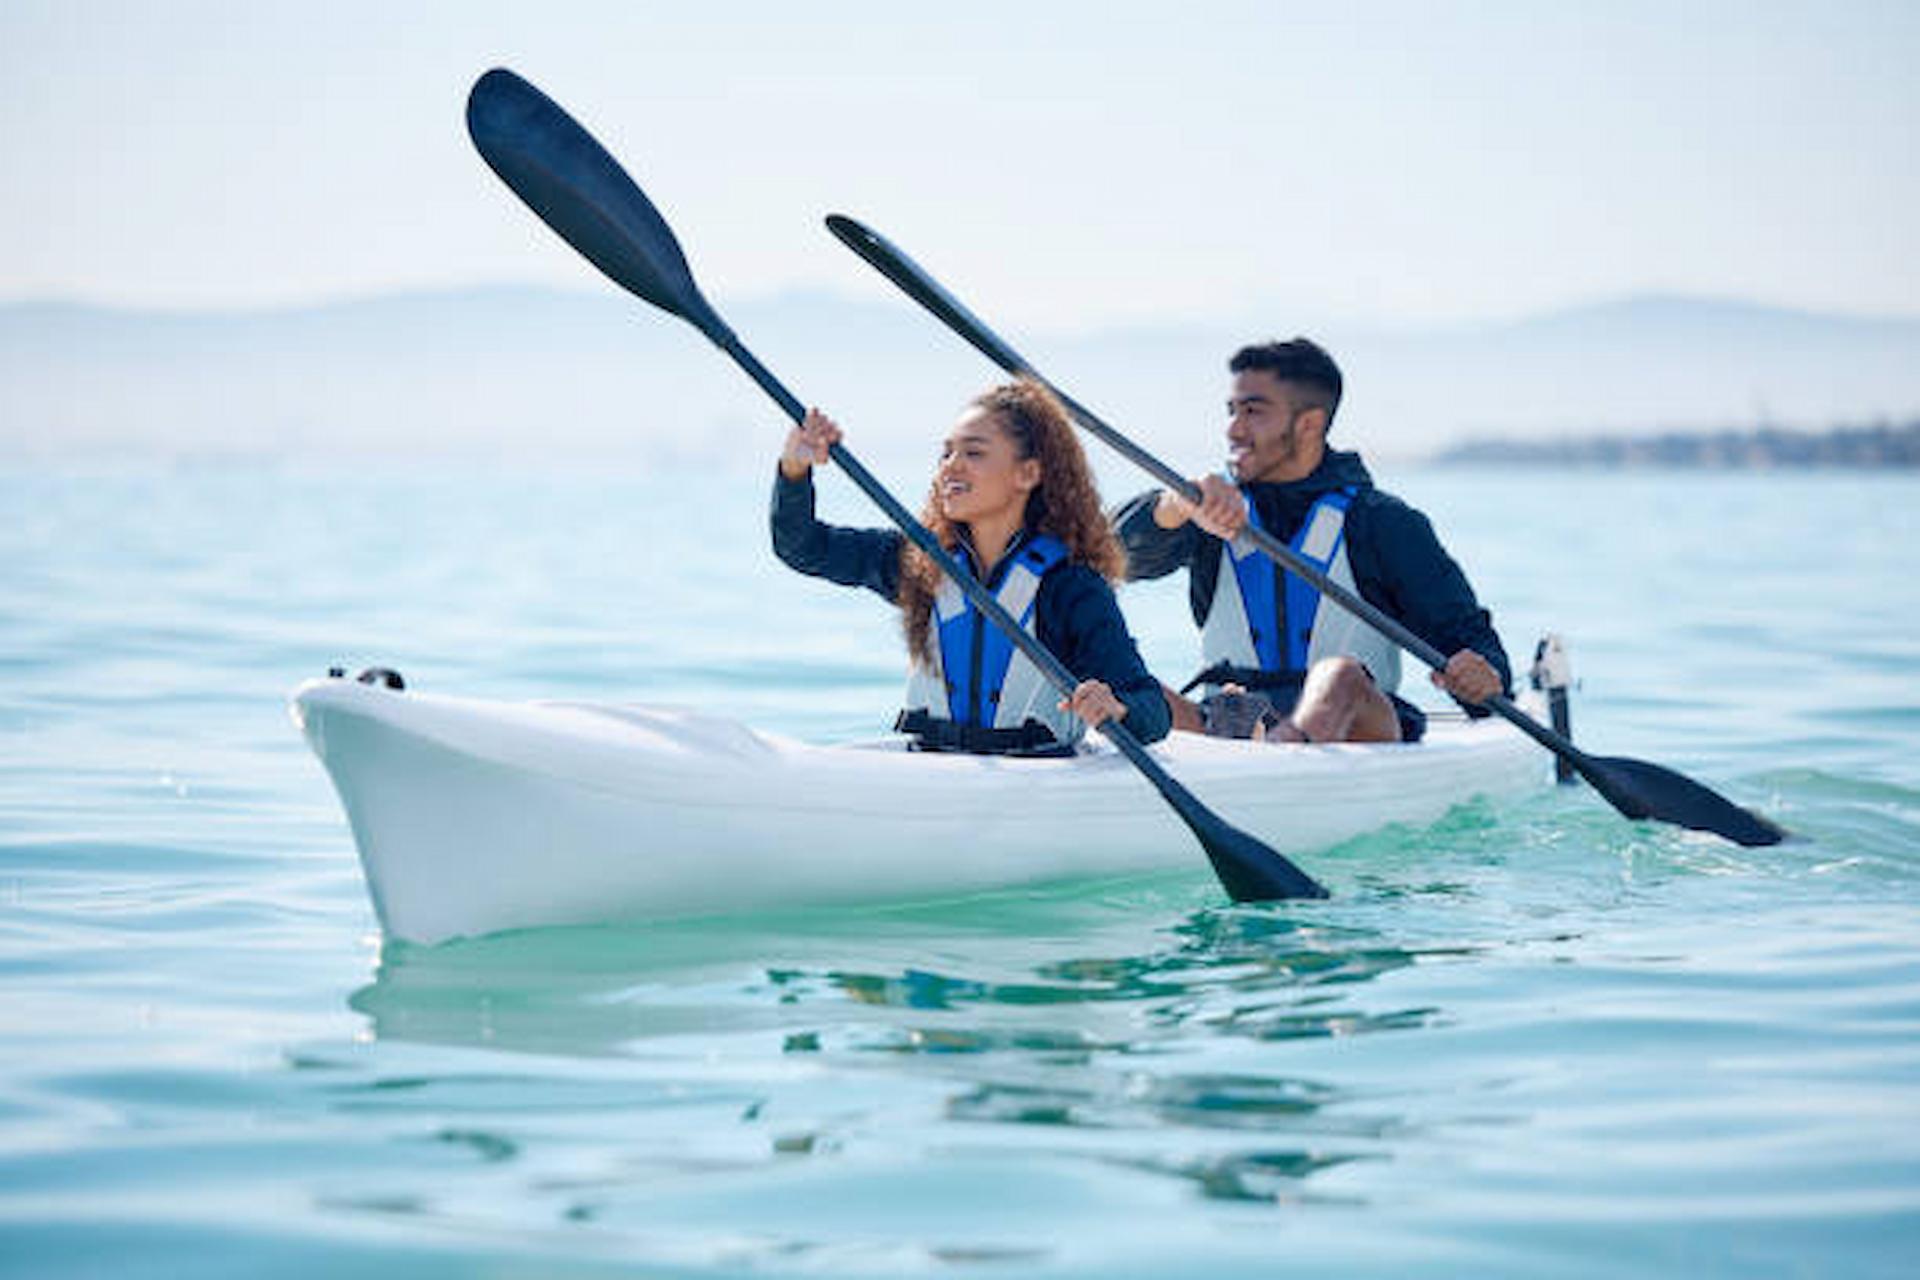 Capital Timeshare- What Sized Kayak Do You Need For Water Sports During A Vacation?